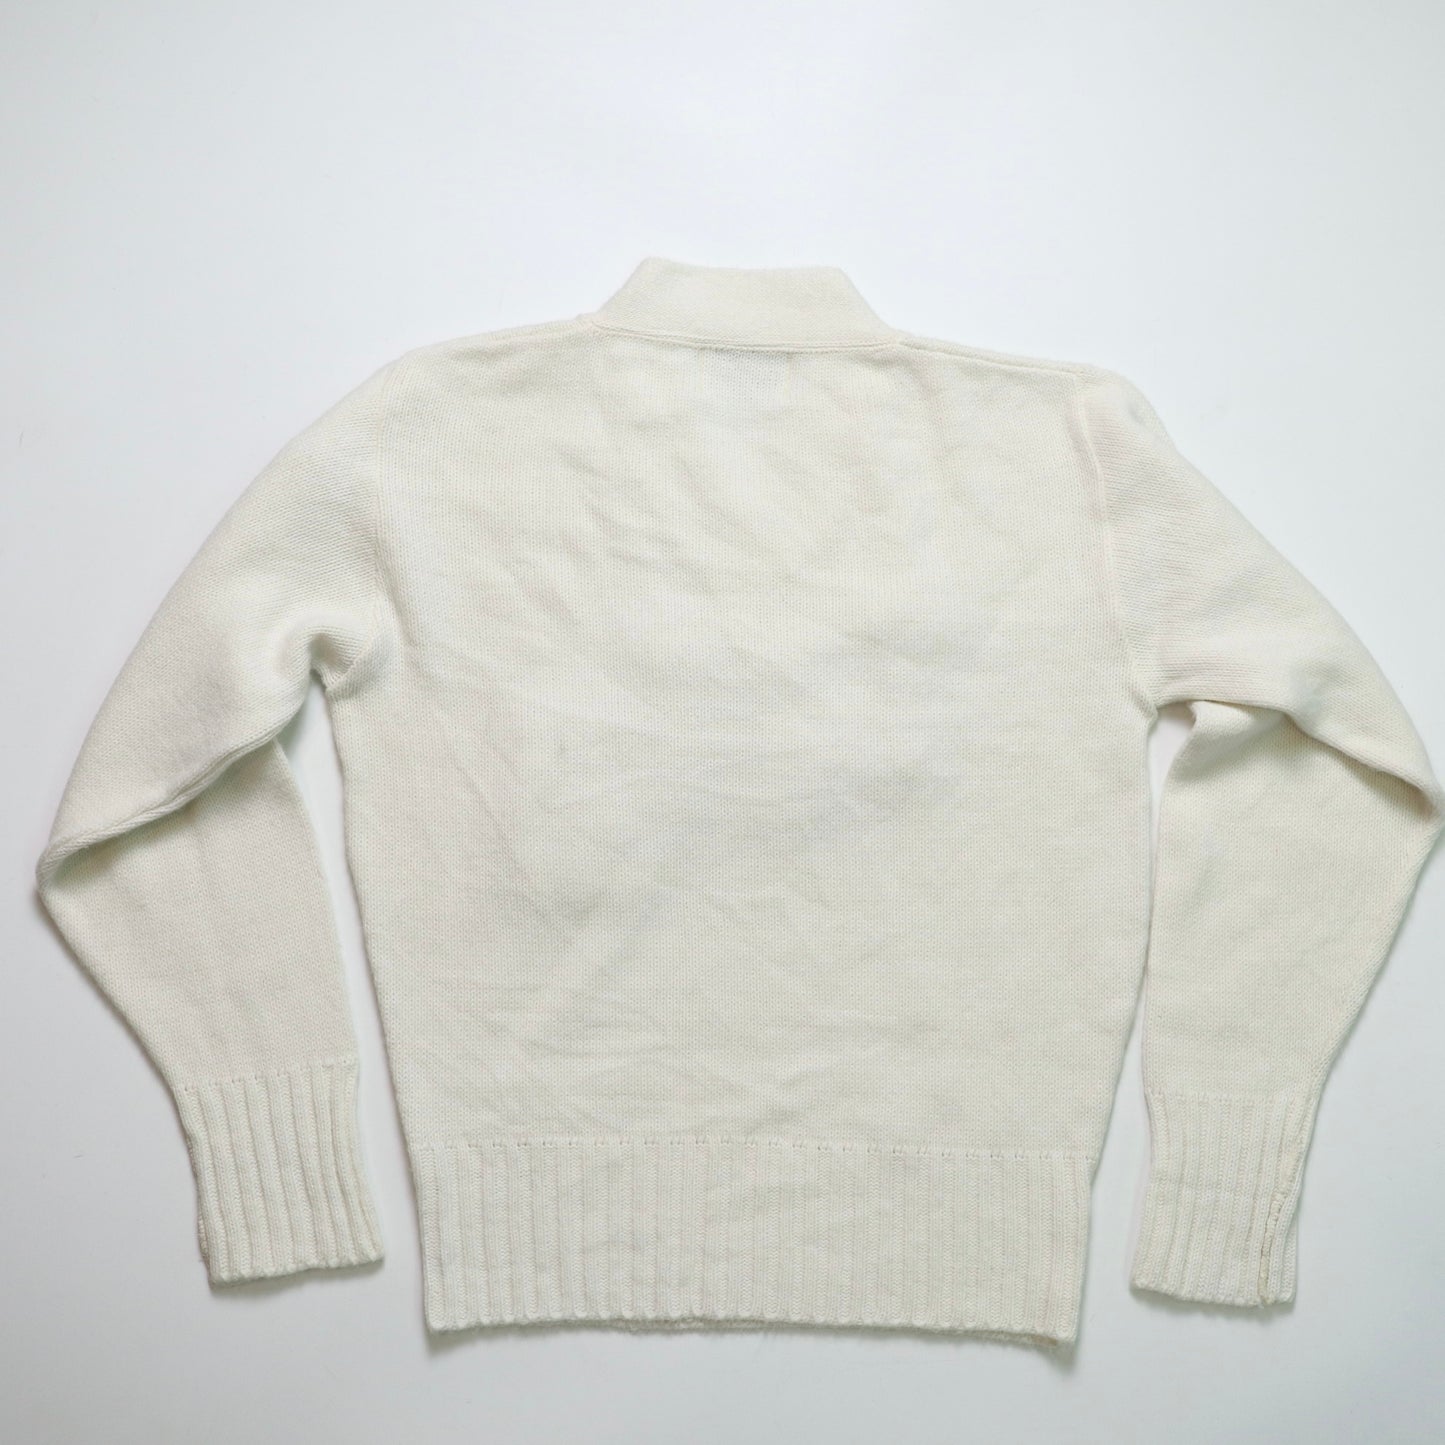 70's AMF white V-neck campus sweater Letterman Sweater pullover knitted sweater